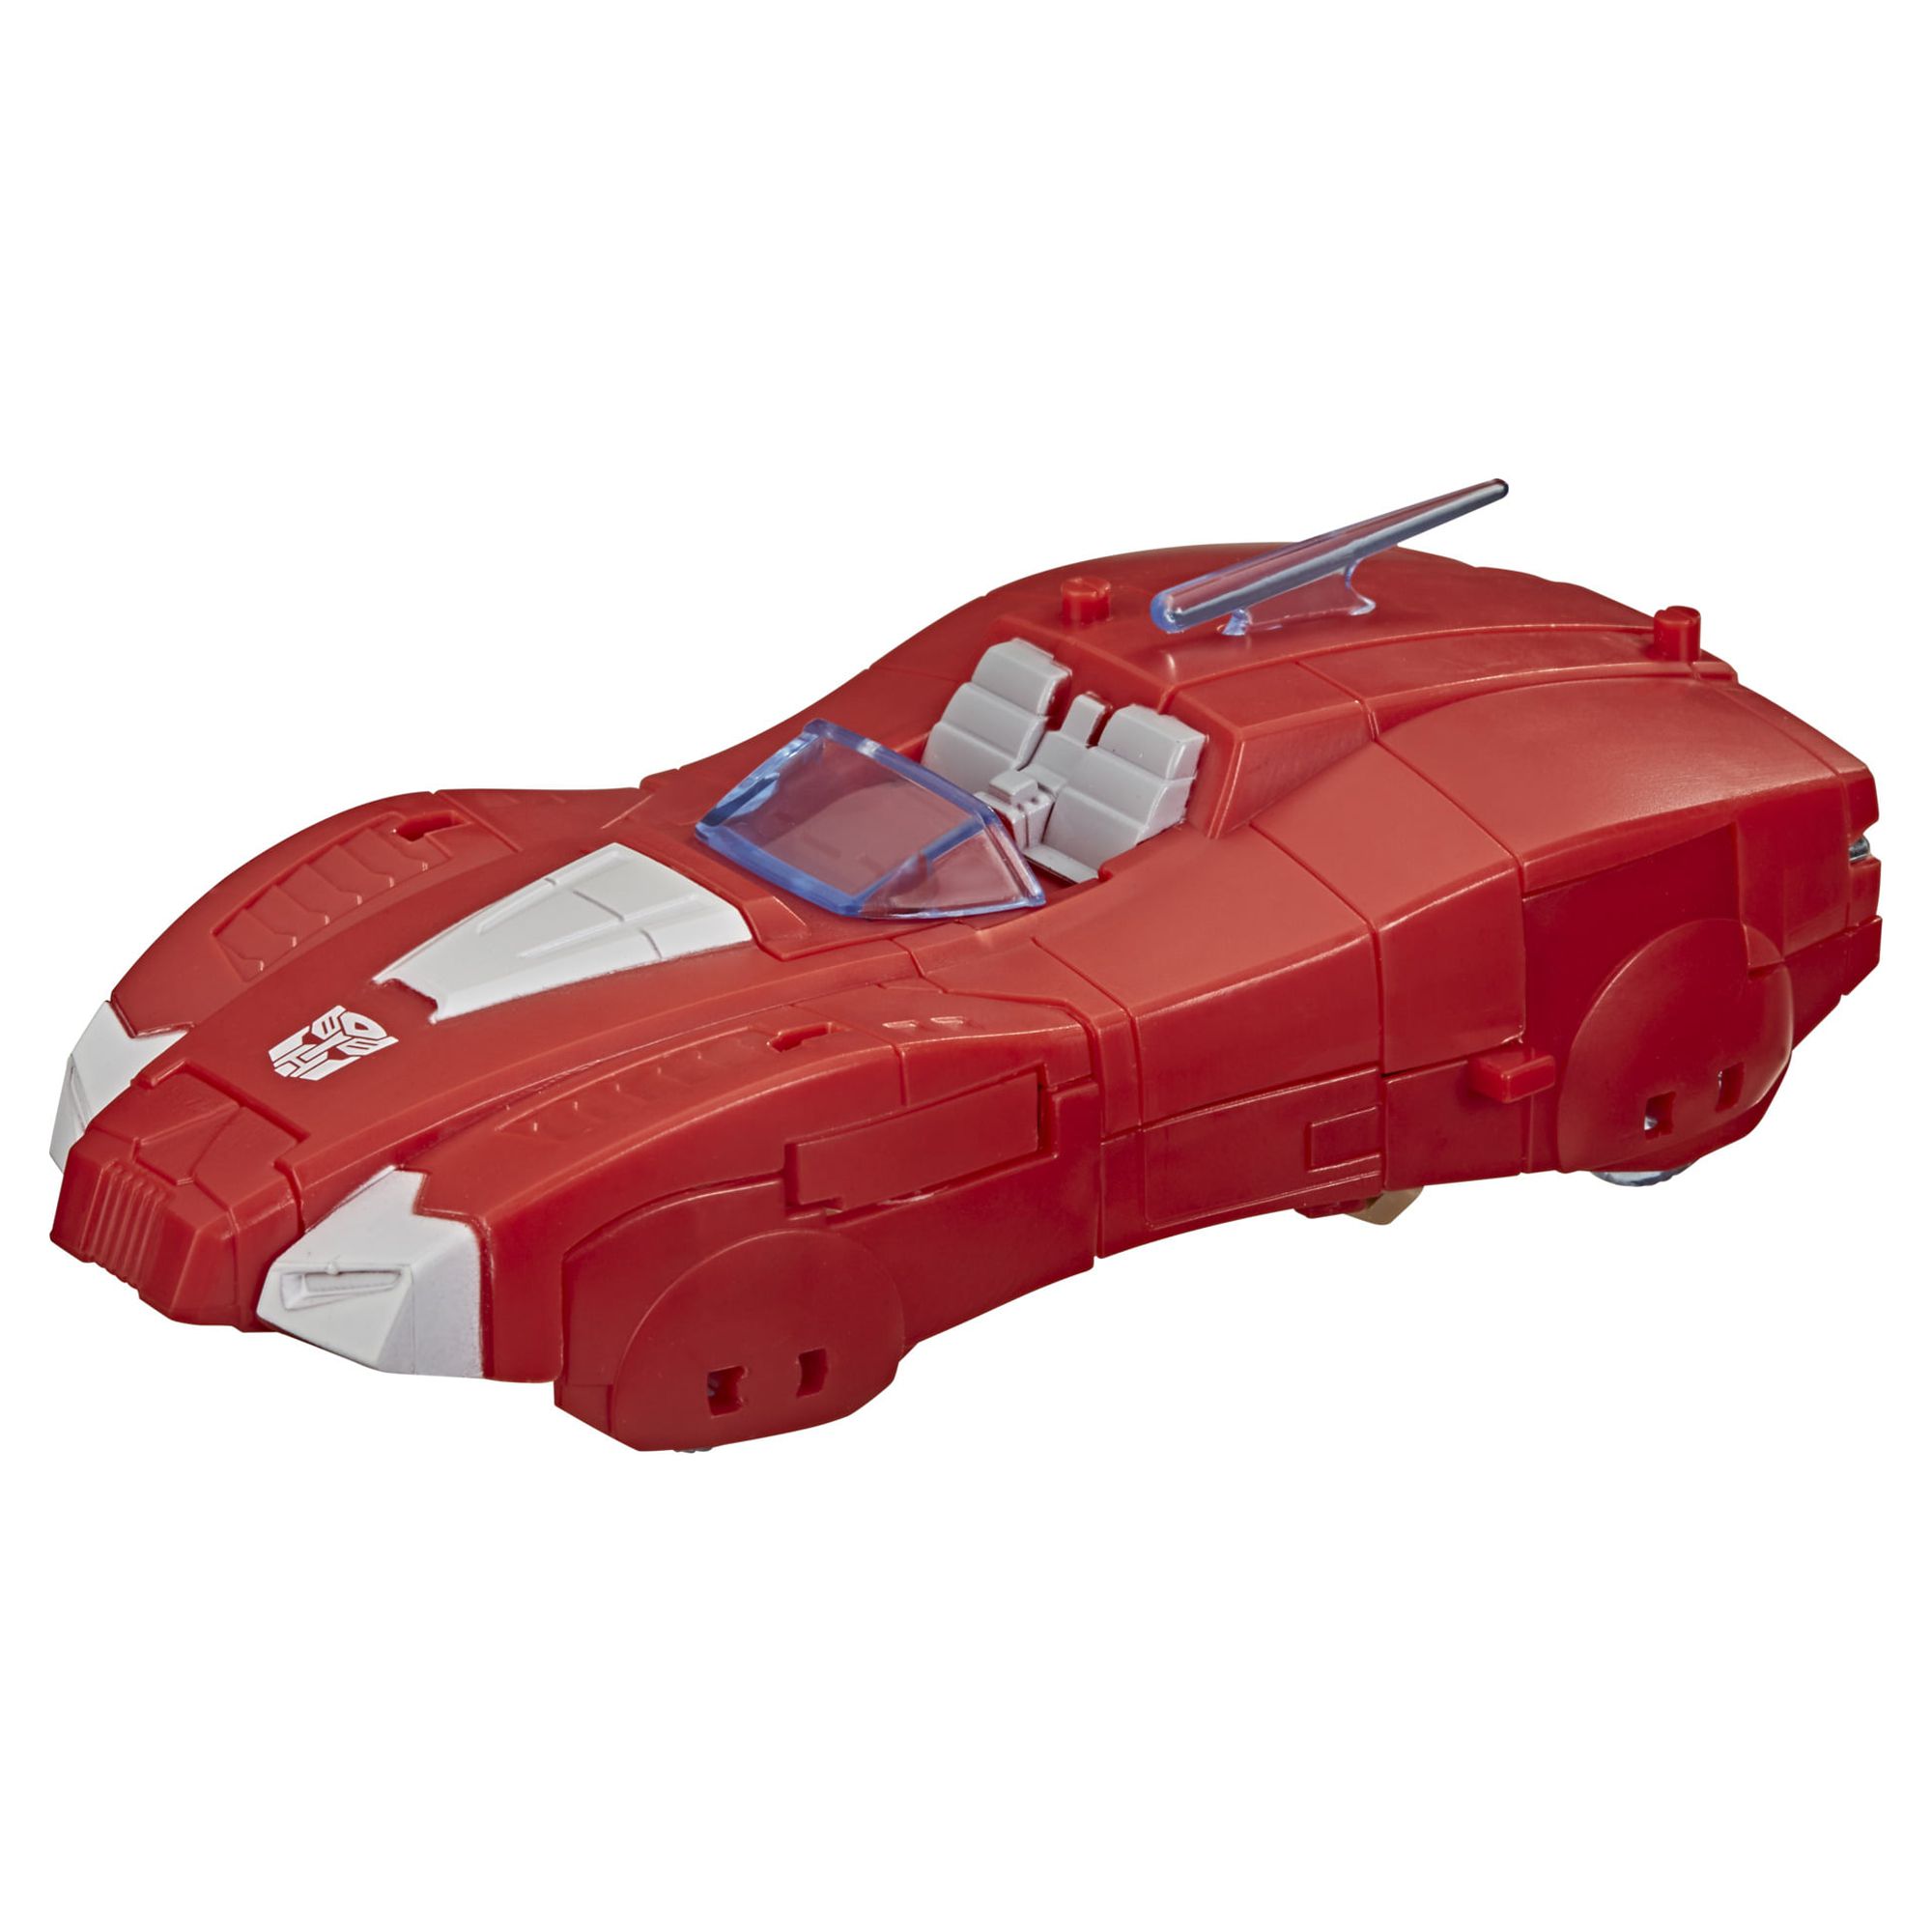 Transformers: War for Cybertron Autobot Elita 1 Kids Toy Action Figure for Boys and Girls (6") - image 2 of 5